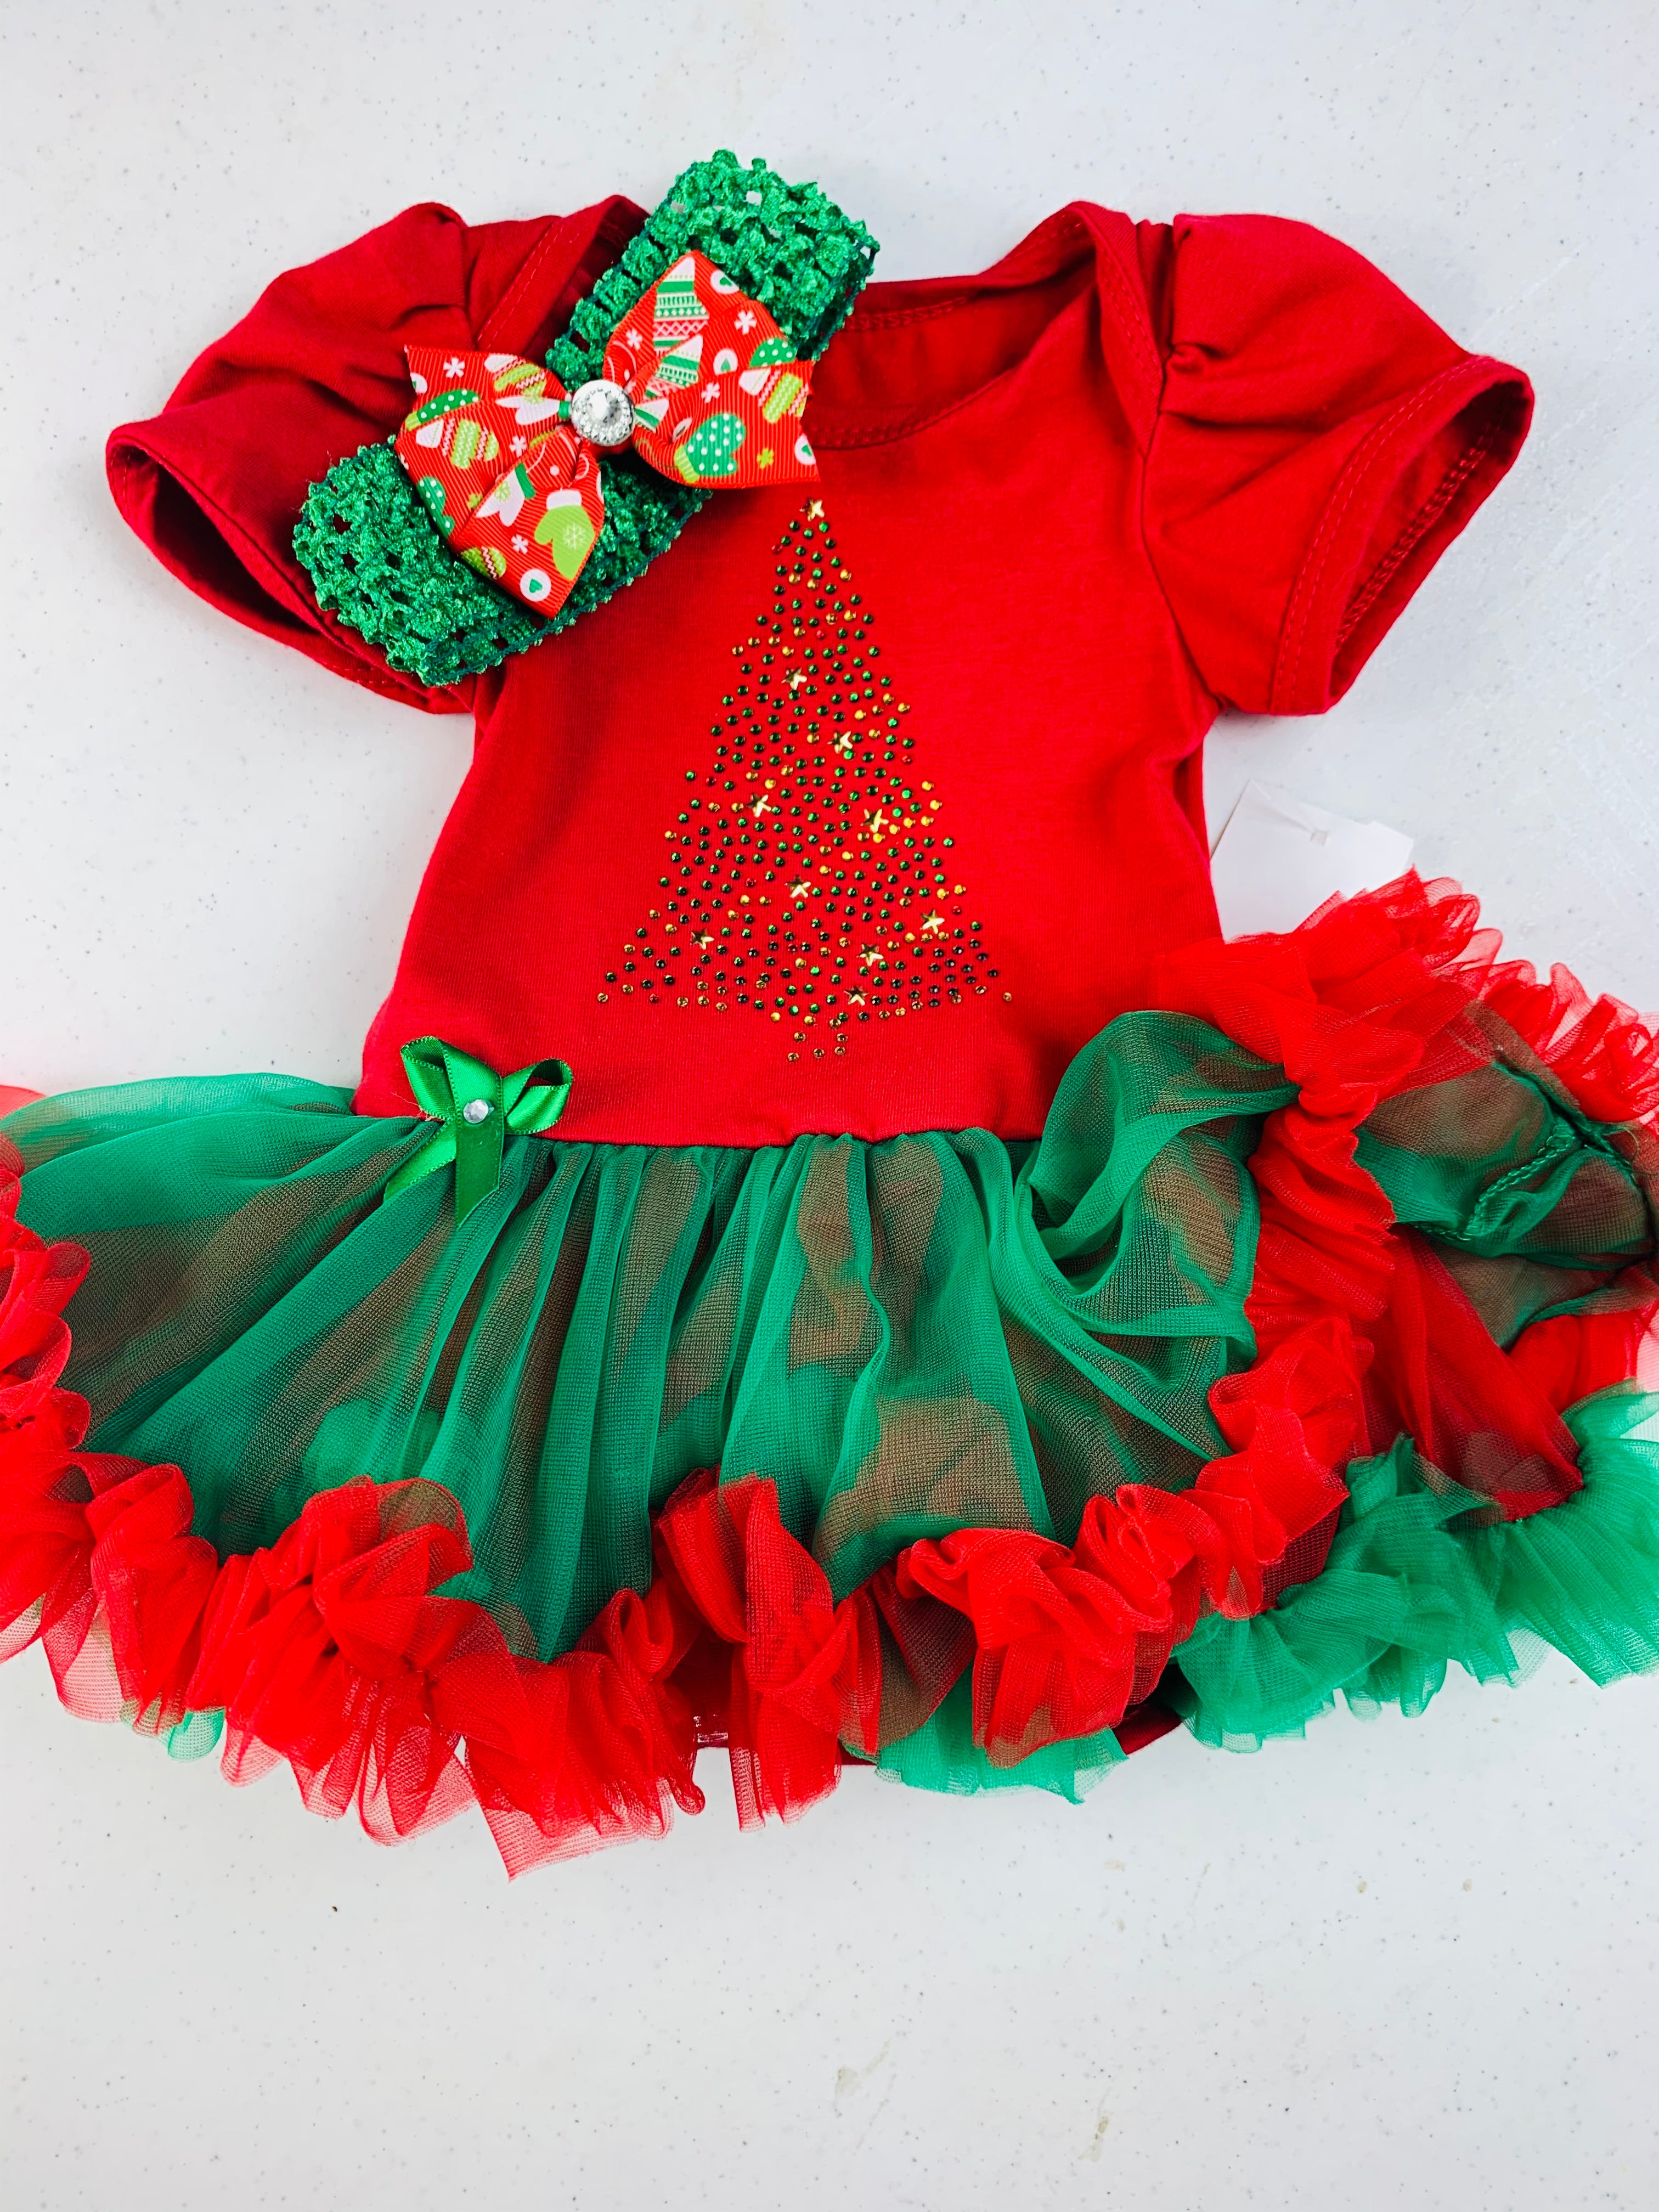 Resale Christmas outfit with bow 🧵 3m